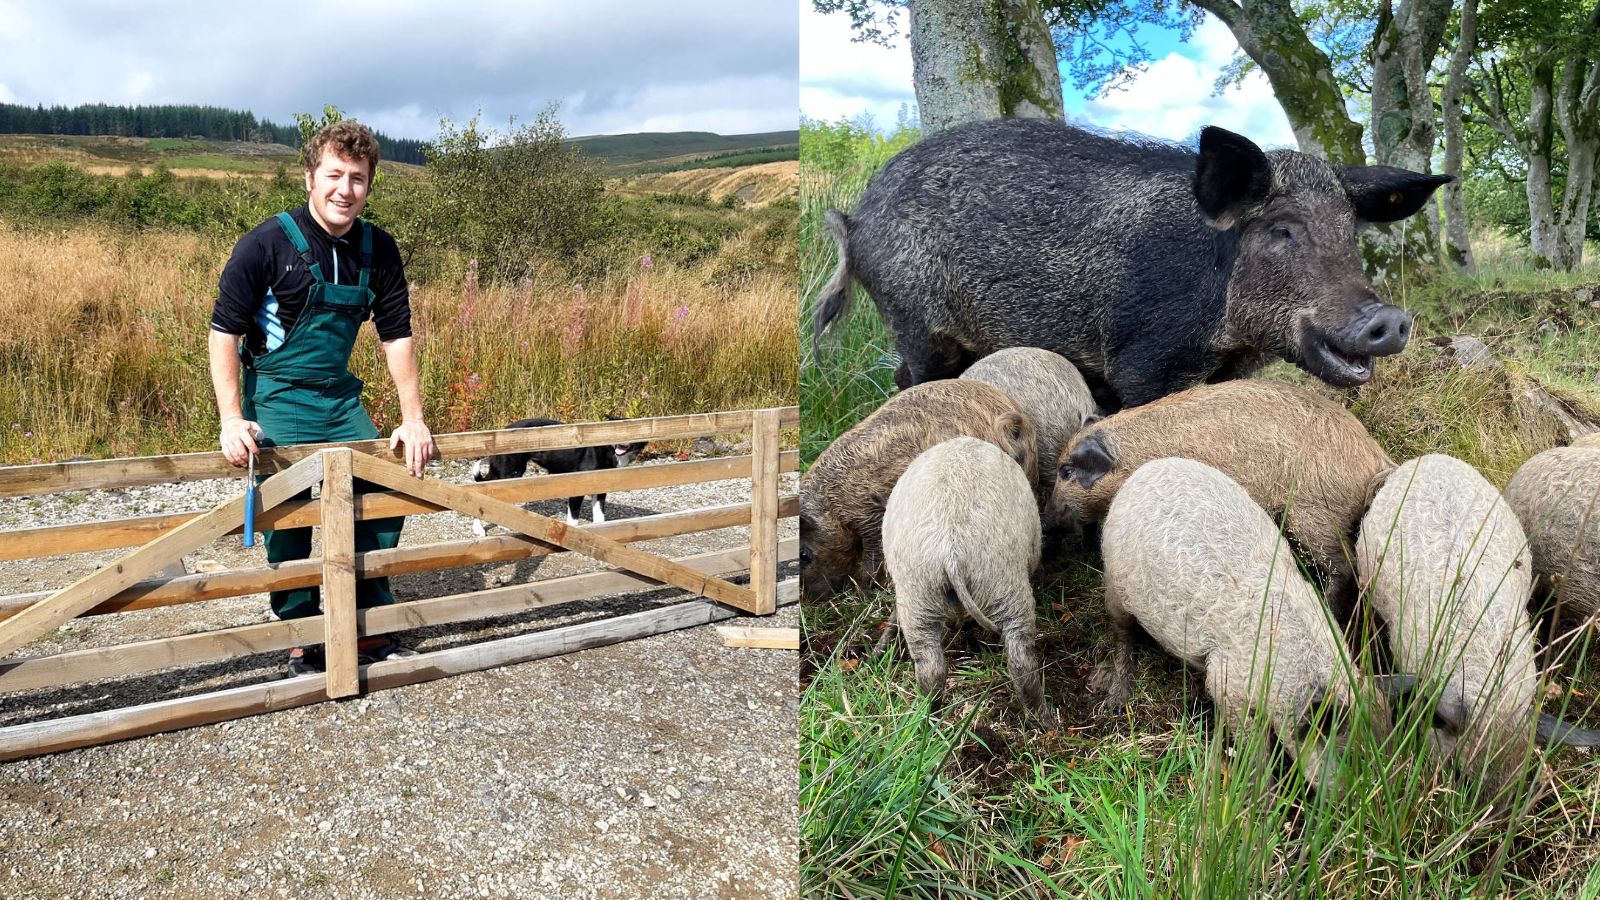 LEFT: David with a gate he made at Brodoclea | RIGHT: Happy pigs at Brodoclea